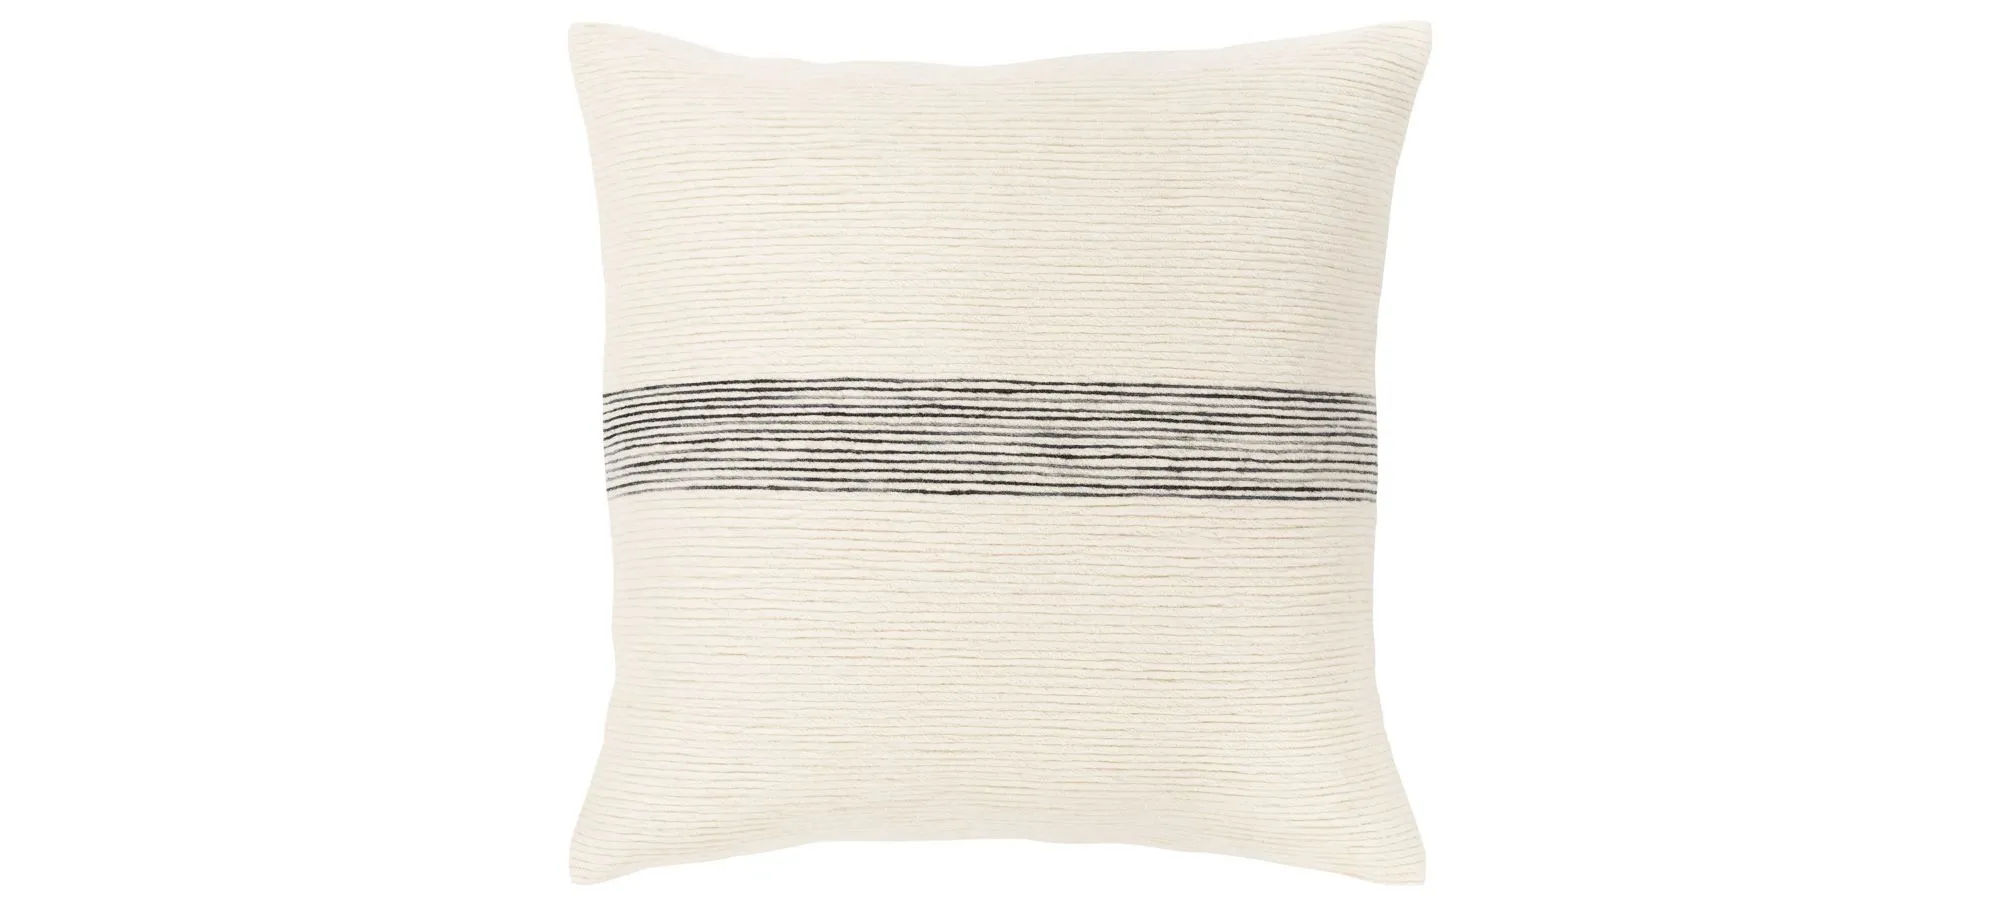 Carine 18" Down Filled Throw Pillow in Cream, Ivory, Black, Charcoal by Surya